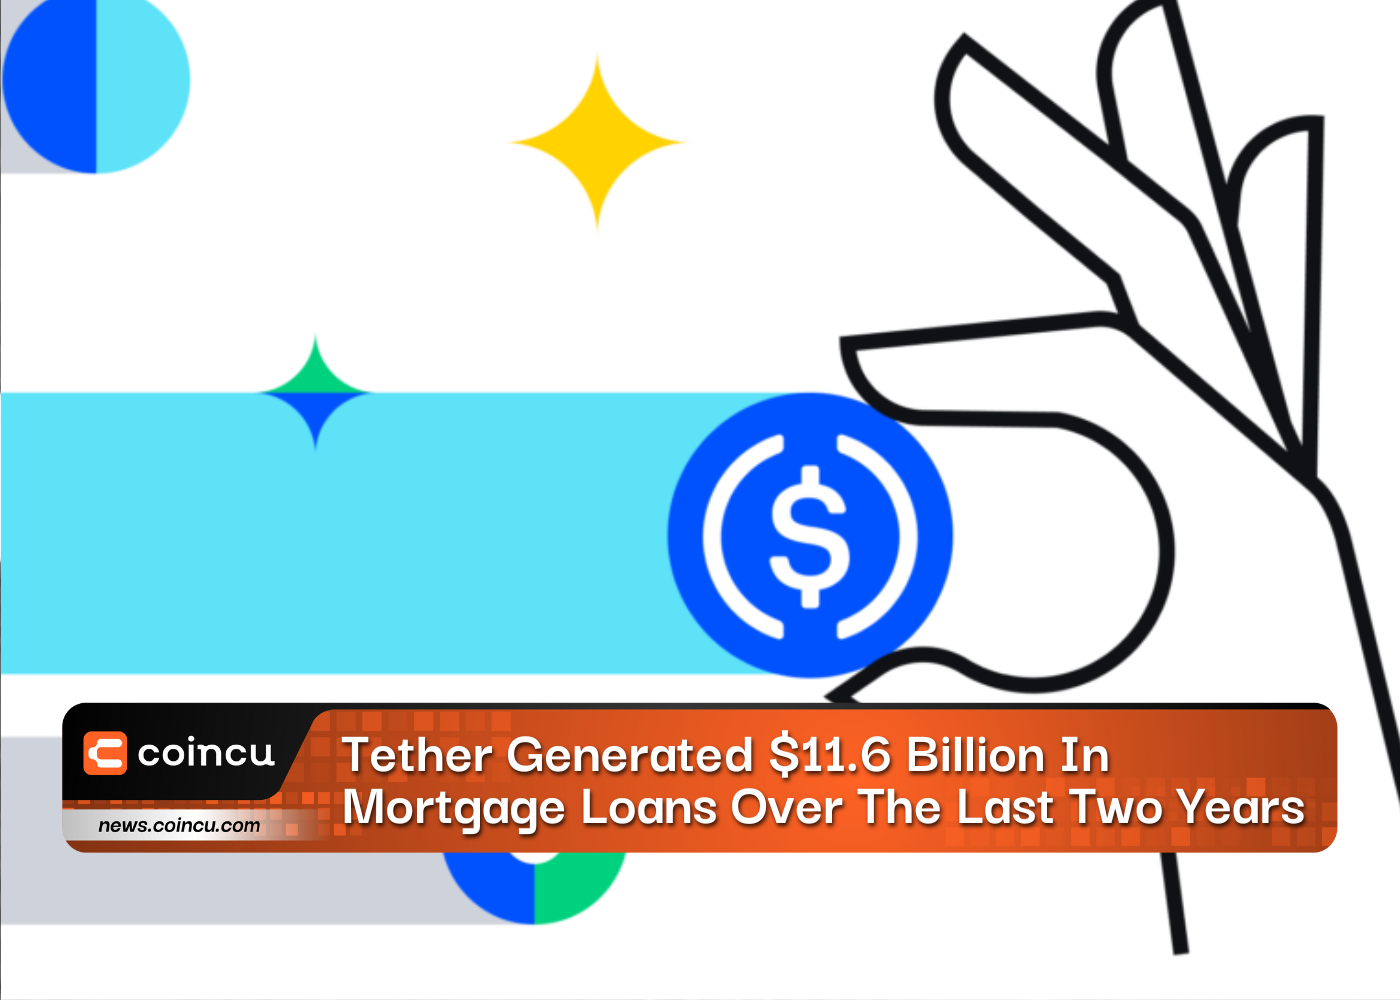 Tether Generated $11.6 Billion In Mortgage Loans Over The Last Two Years